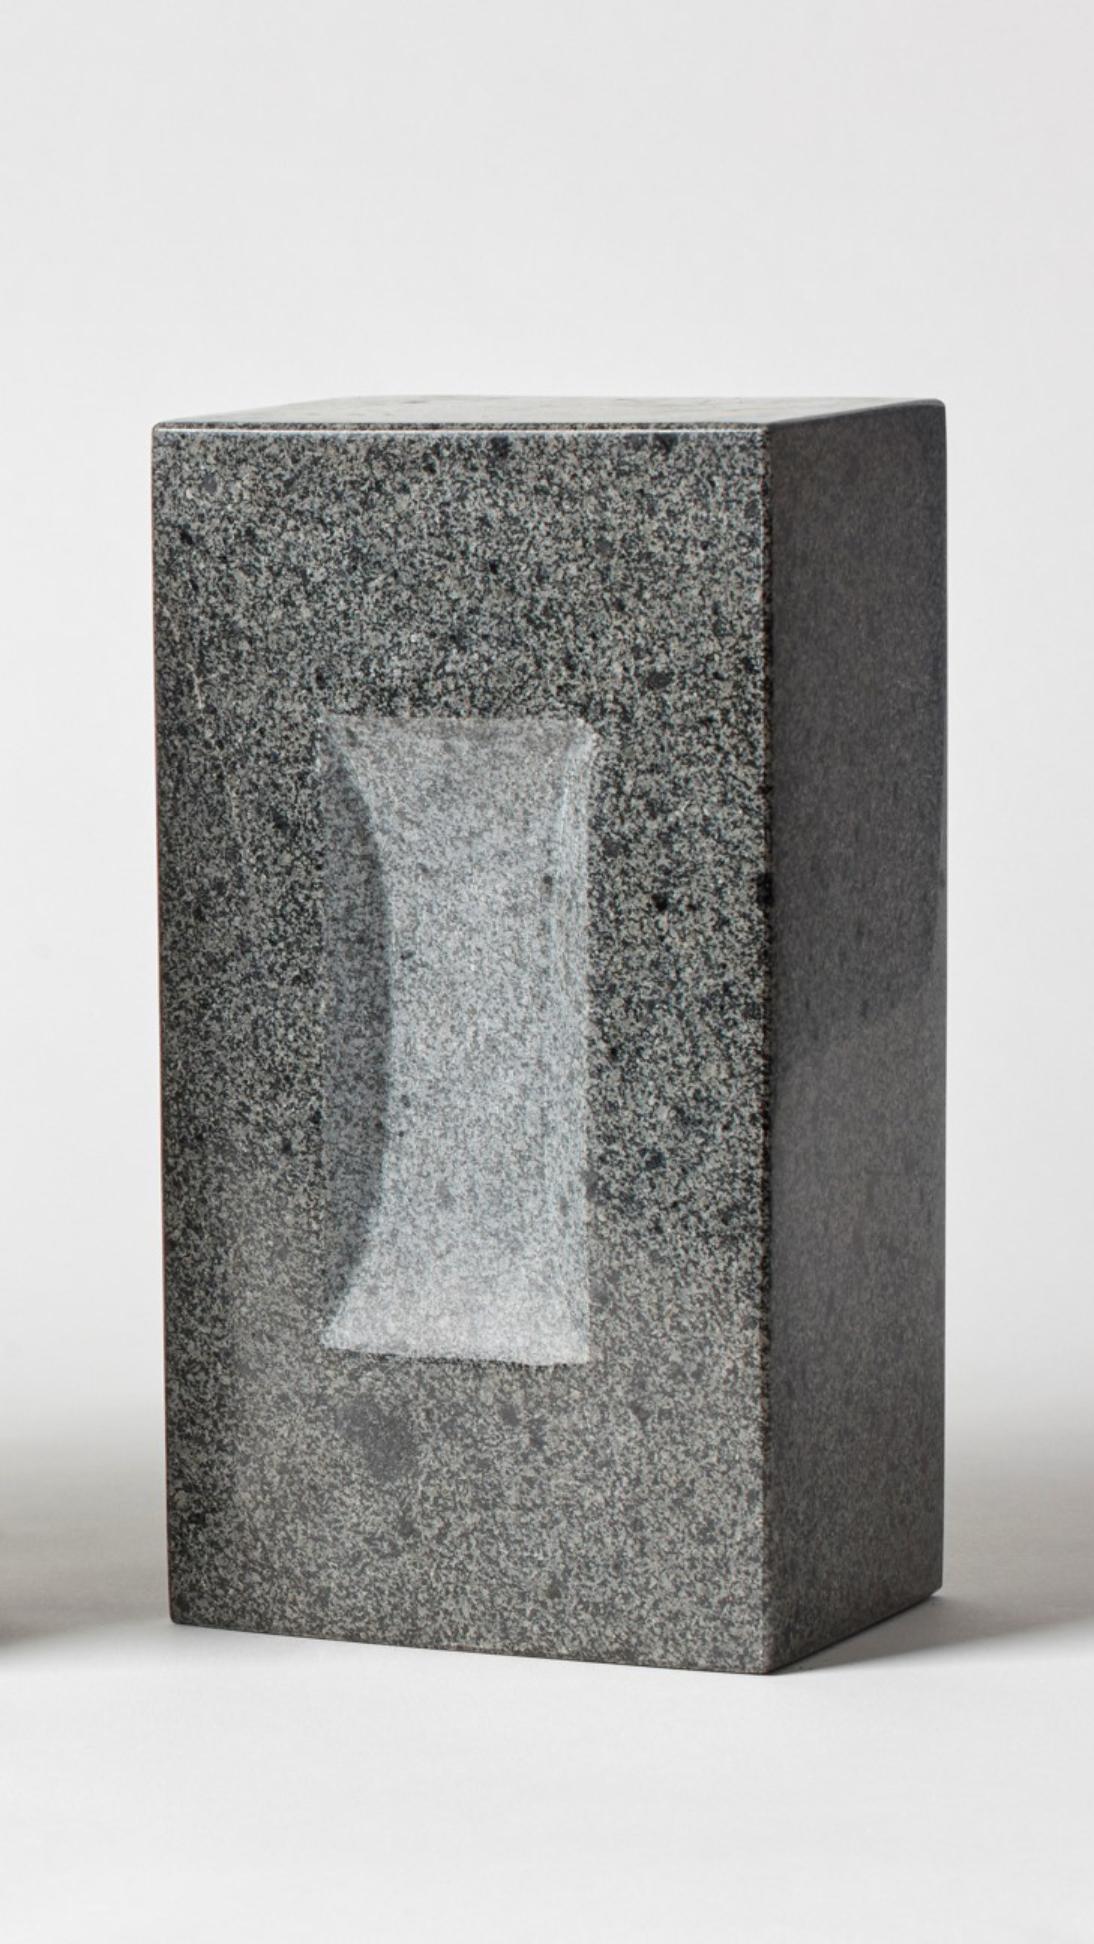 BRICK by Estudio Rafael Freyre
Dimensions: W 12.5 D 9 x H 23 cm 
Materials: Andes Stones
Also Available: Other finishes available,

The brick is a generic constructive element that constitutes part of the urban imaginary. In Peru, moreover, its